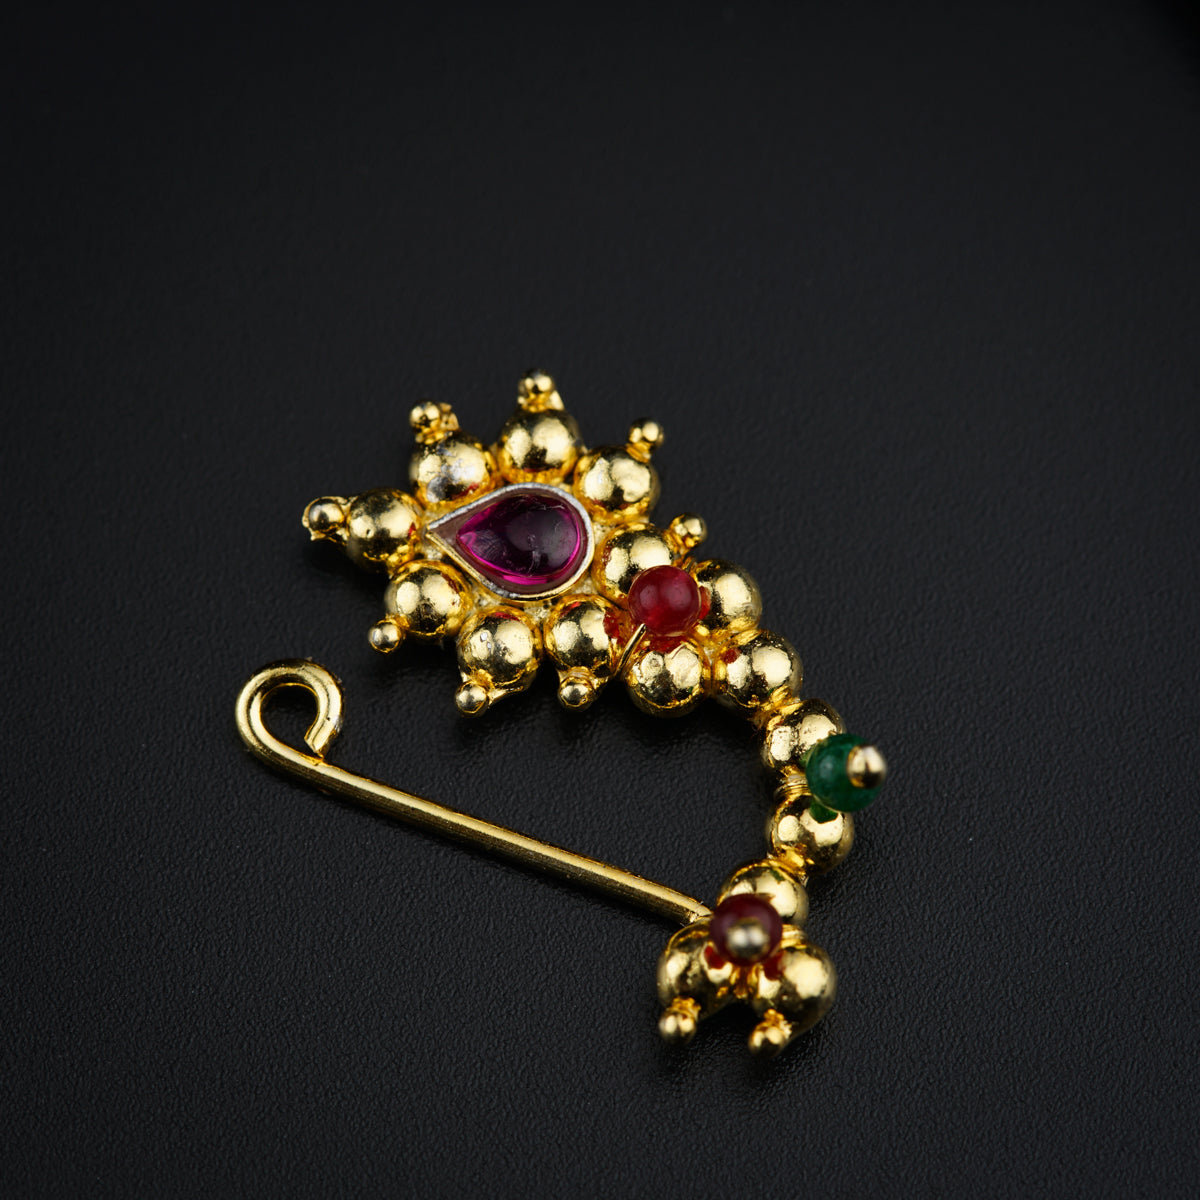 a gold brooch with a red, green and yellow stone